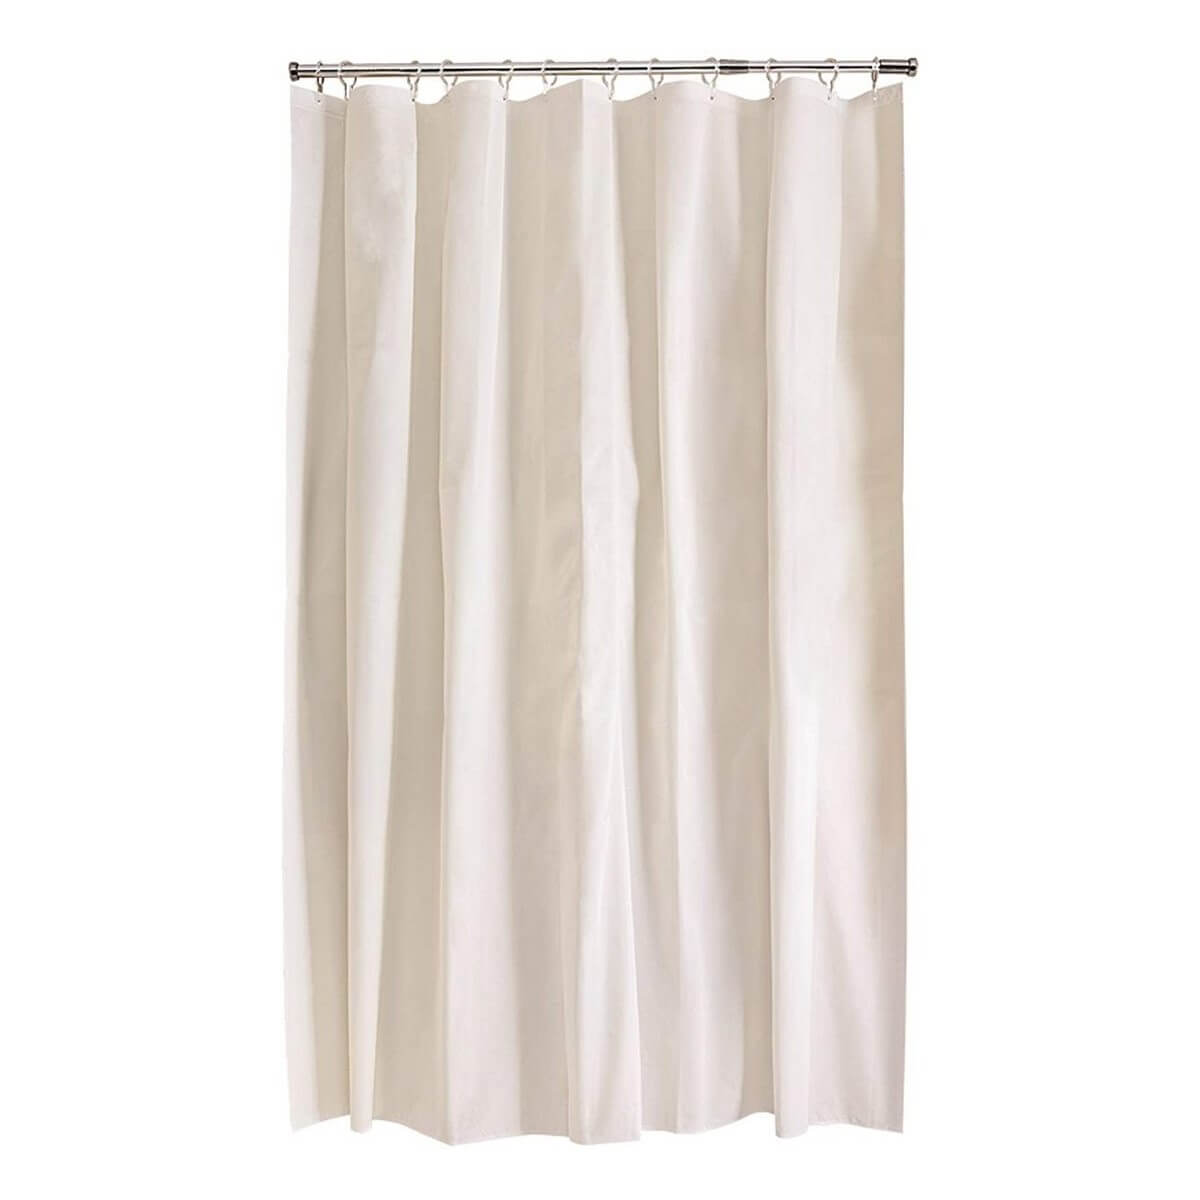 White Soft Luster Finish with Weighted Hem 180 x 180cm AQUALONA Shower Curtain-100% PEVA-Water Repellent Mildew Resistant 